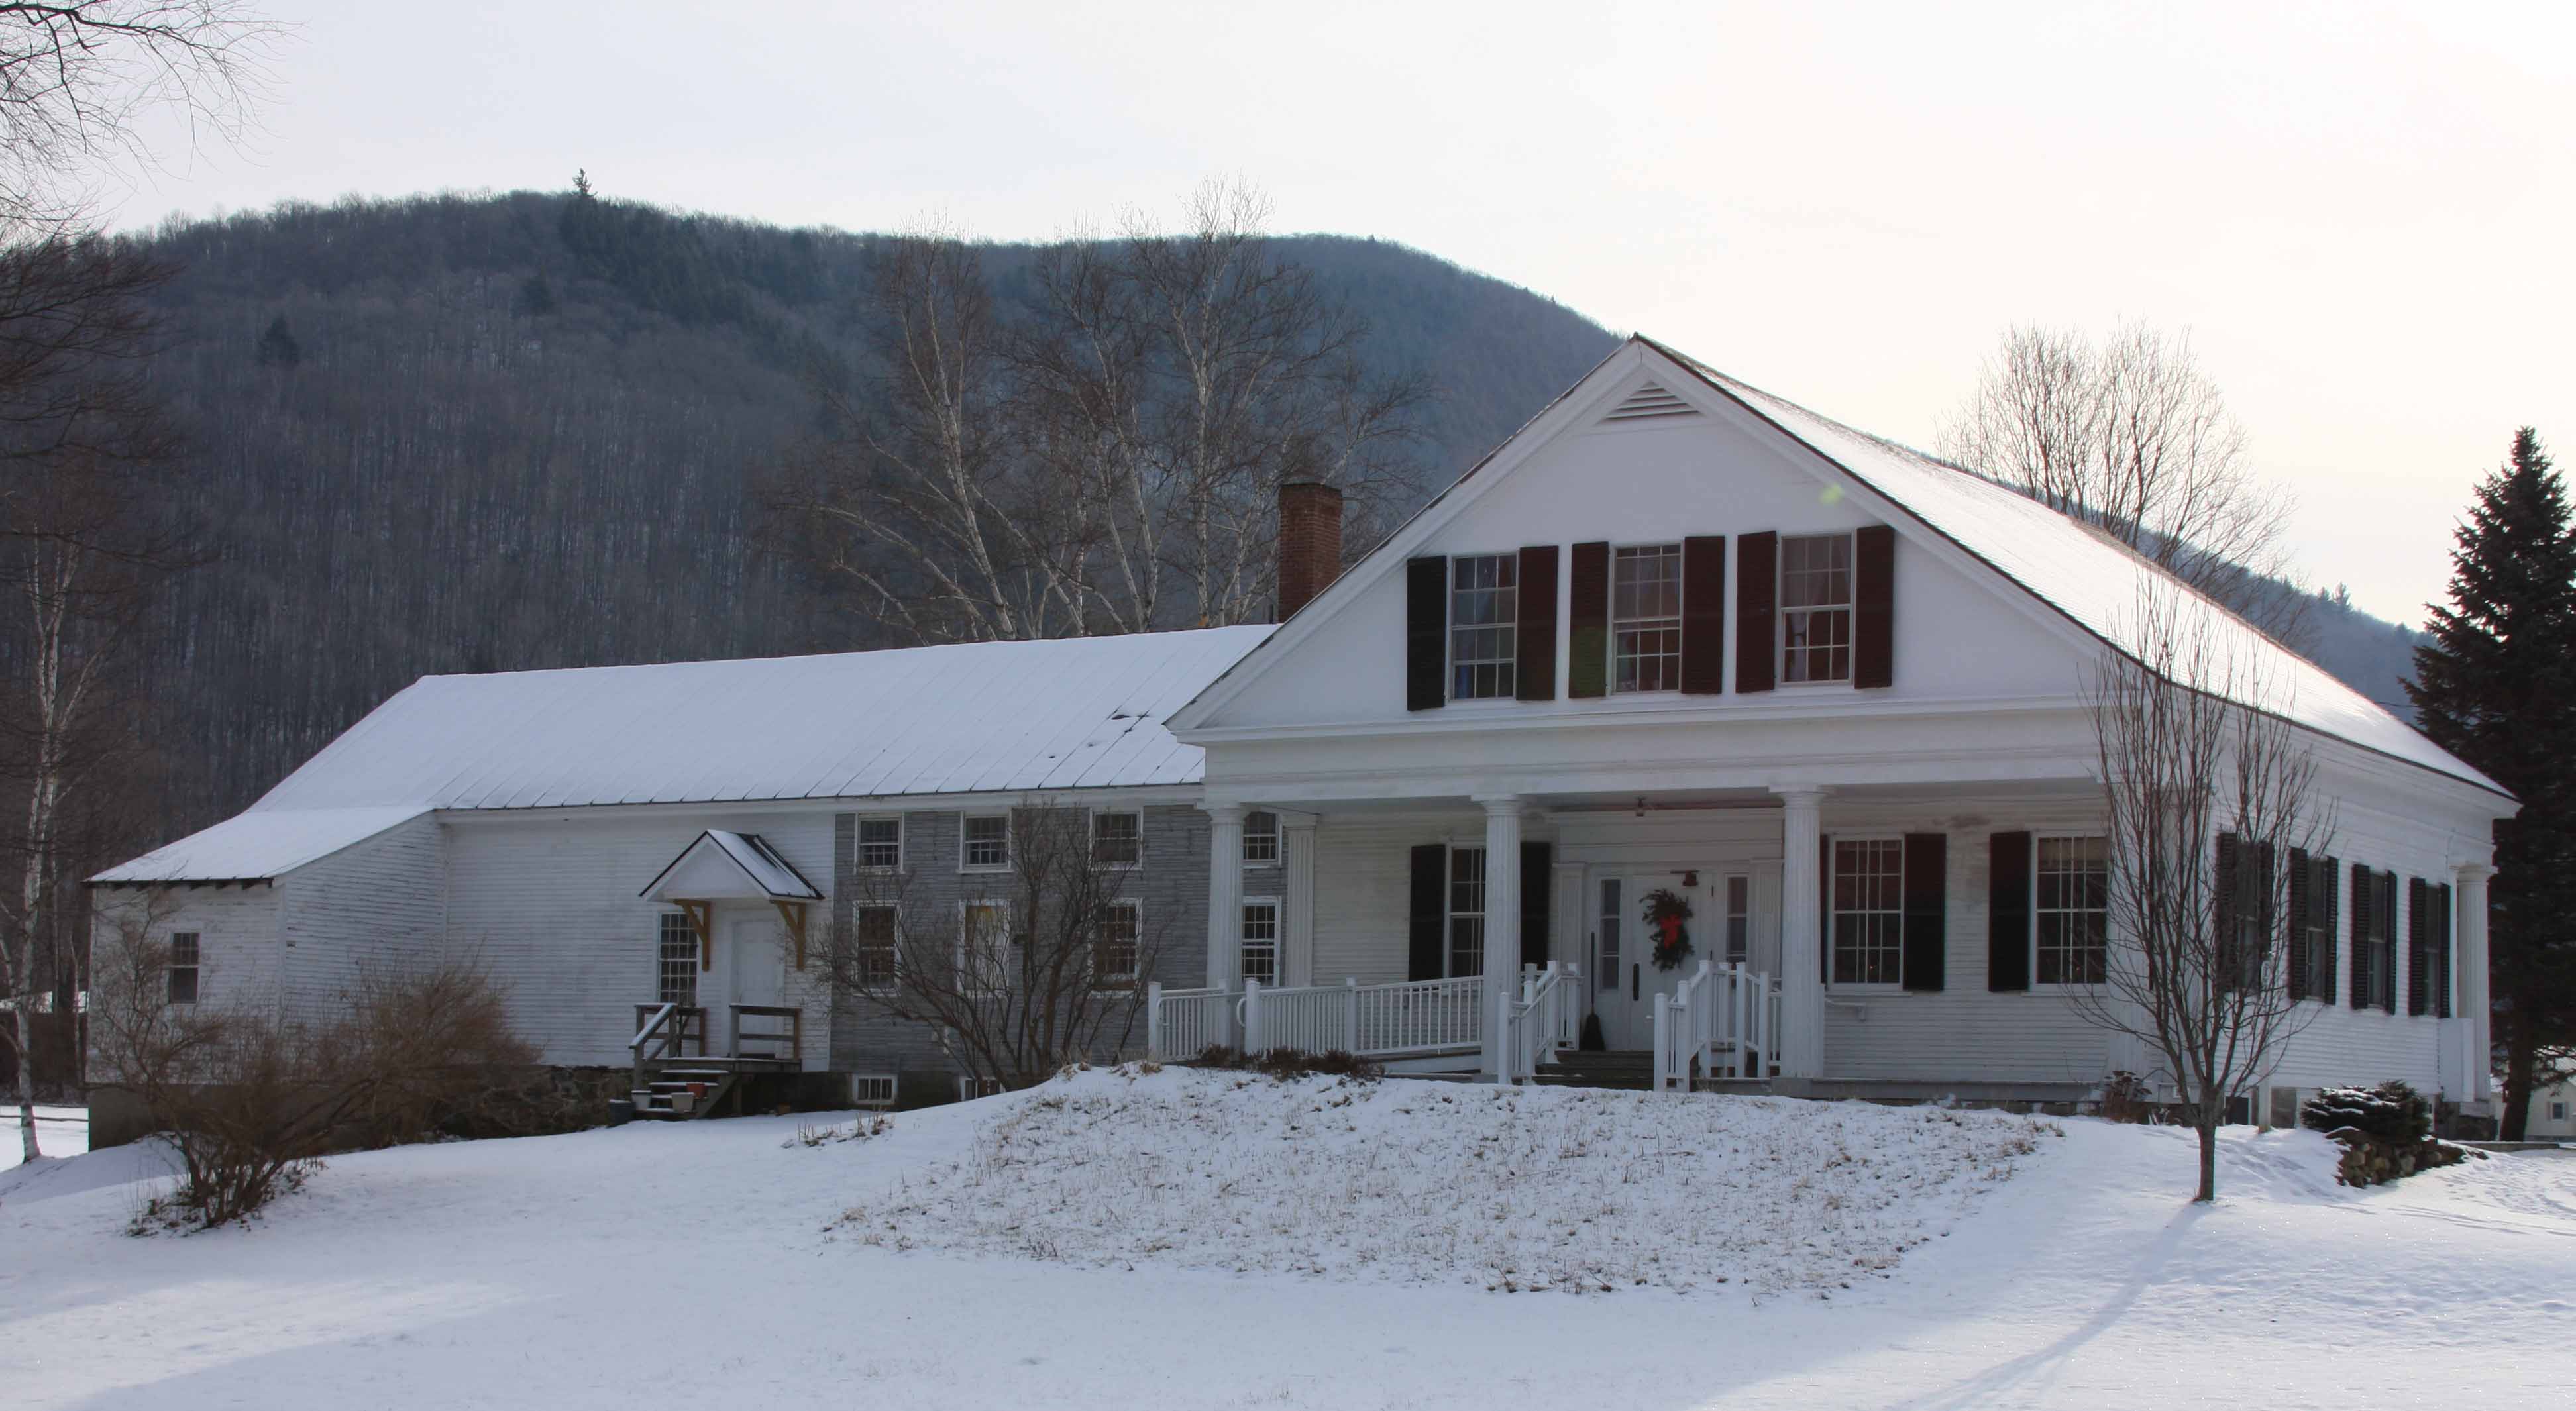 Four Pennsylvania families leave everything behind to build a church in Vermont.